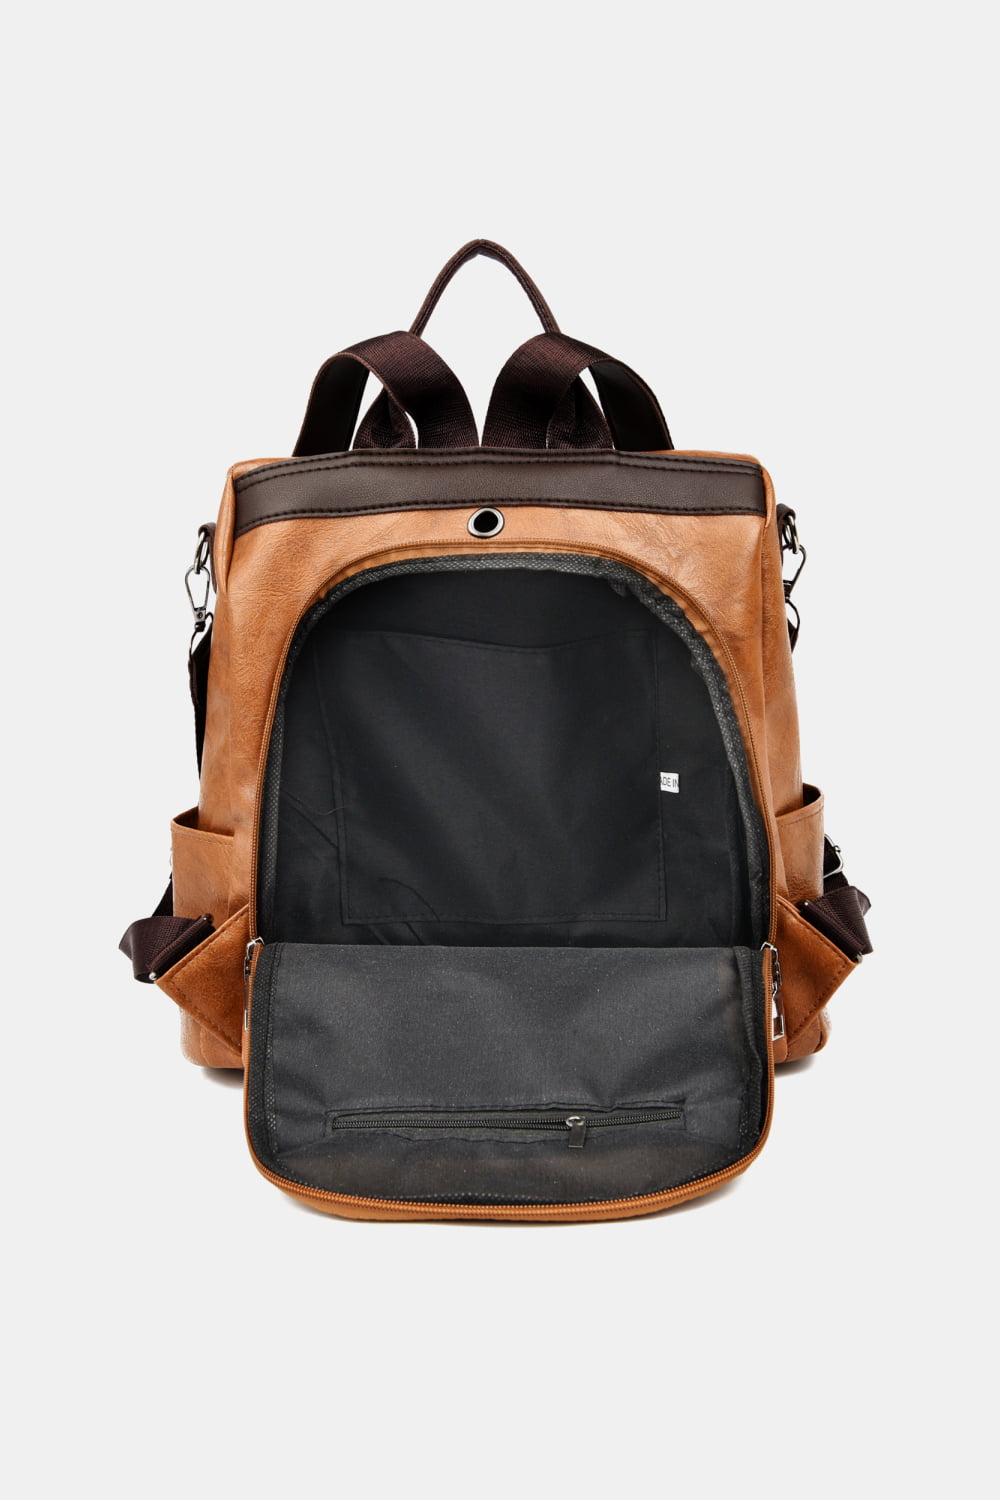 Contrast Color PU Leather Backpack [additional options available]